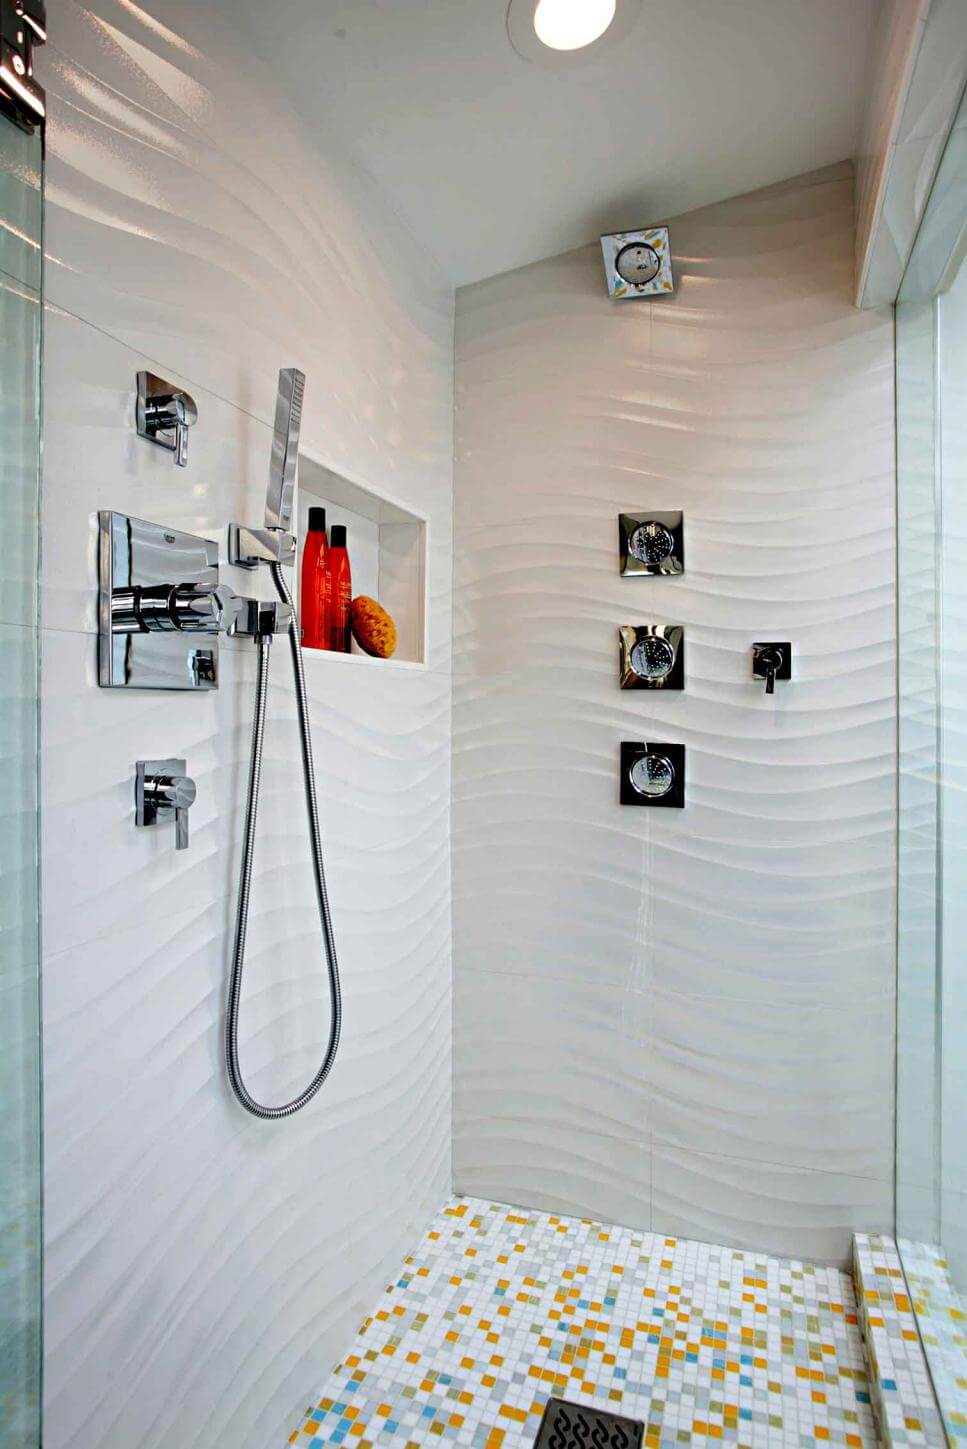 Refreshing Palm Textured Wall with Cheerful Tiling - shower tile ideas